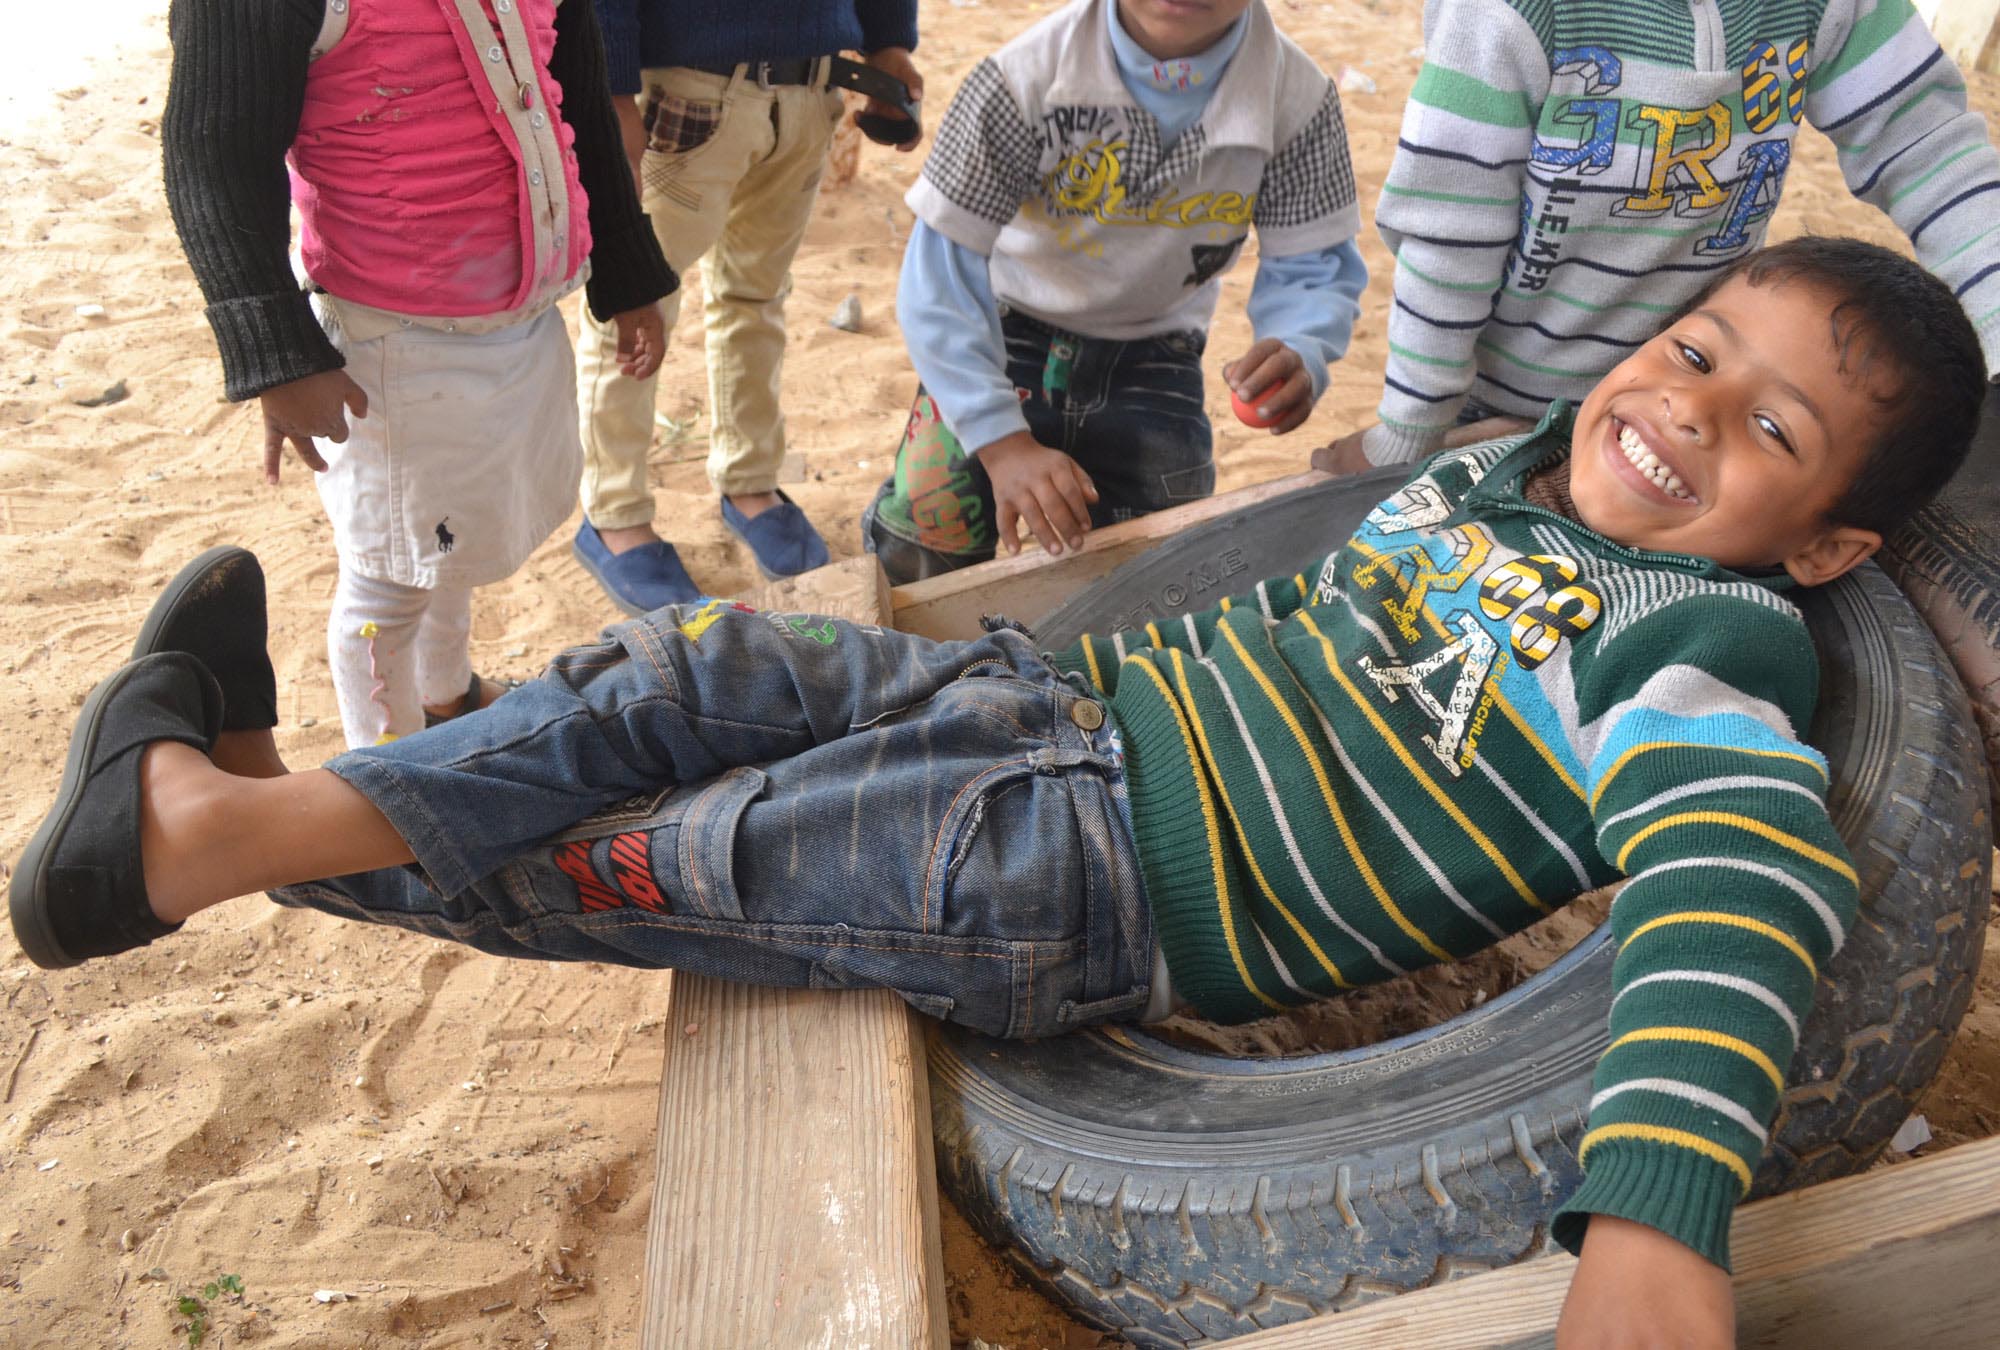 The delivery of TOMS Shoes to Loay’s school in Gaza was a most welcome gift. Loay insists he will never take them off.